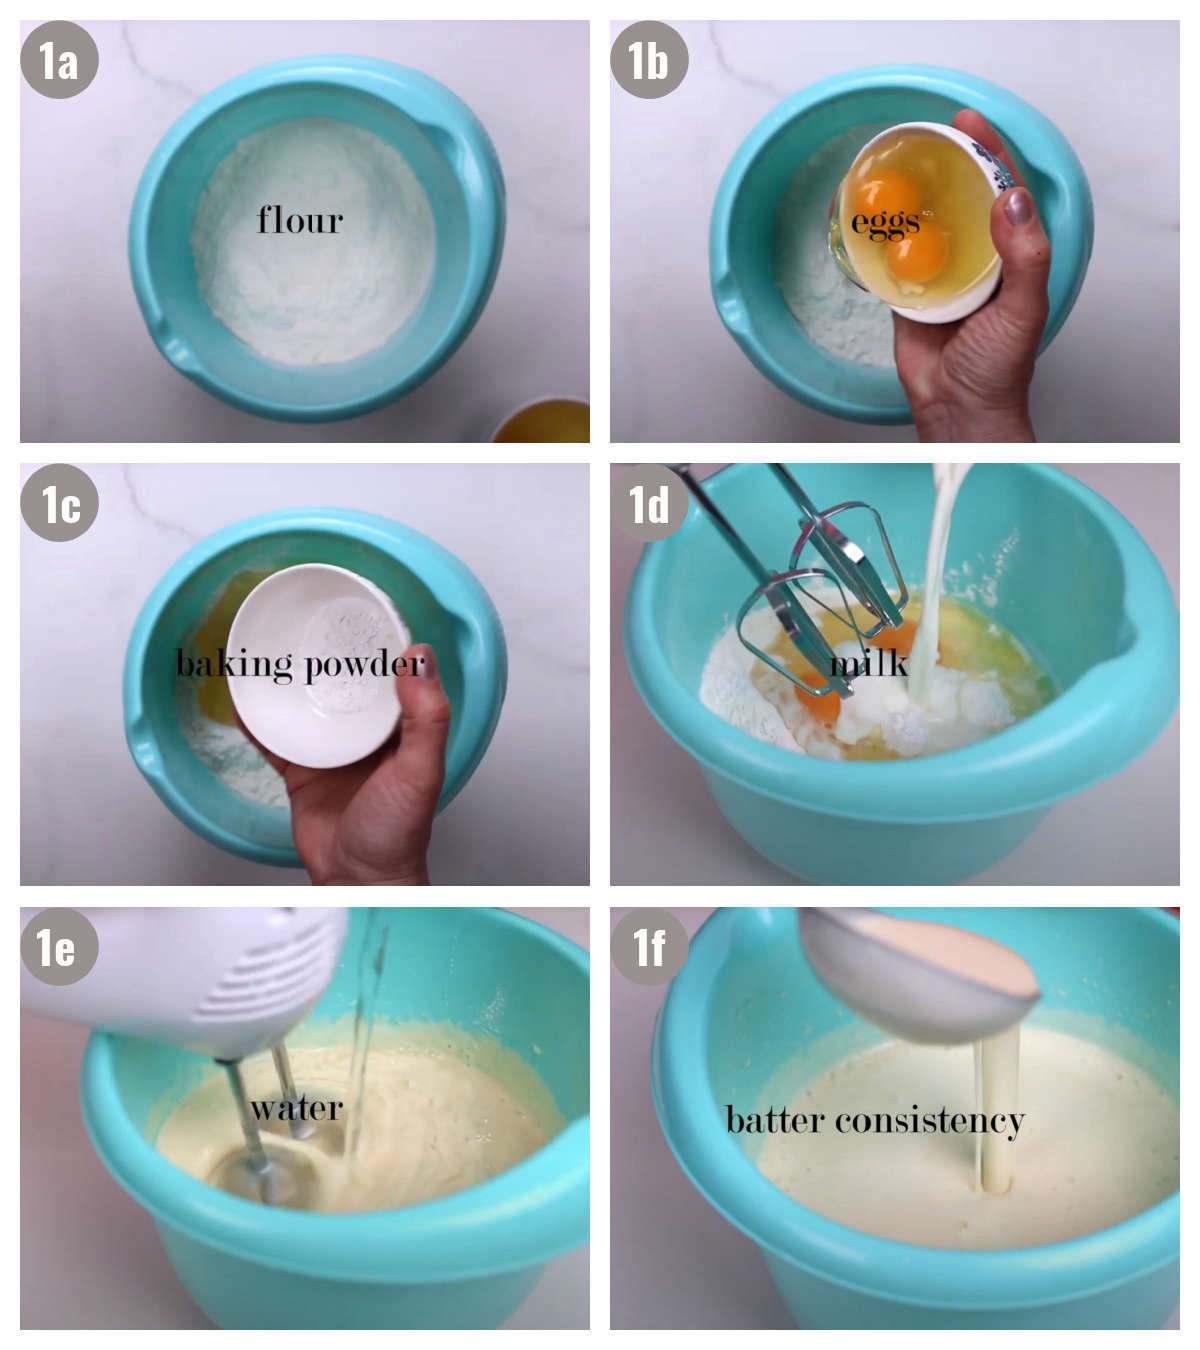 Six photographs, two by three, of crepes being made in a blue bowl. 